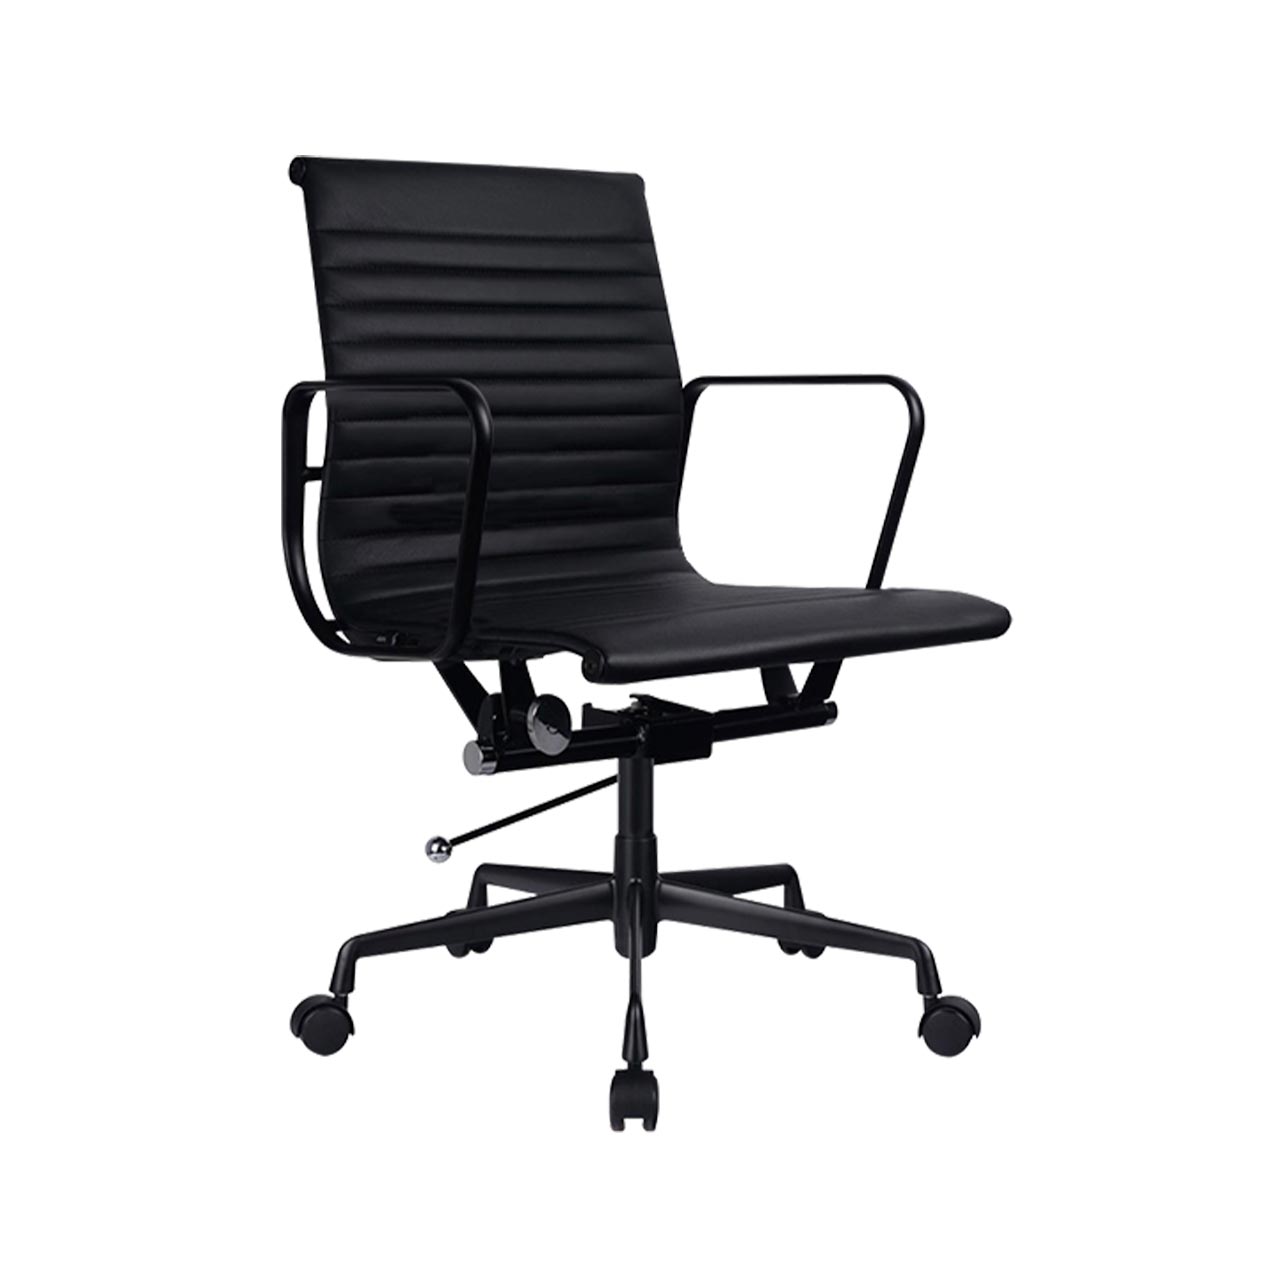 VYVE Leather Chair | Stylish Ergonomic Chair | The Home Office